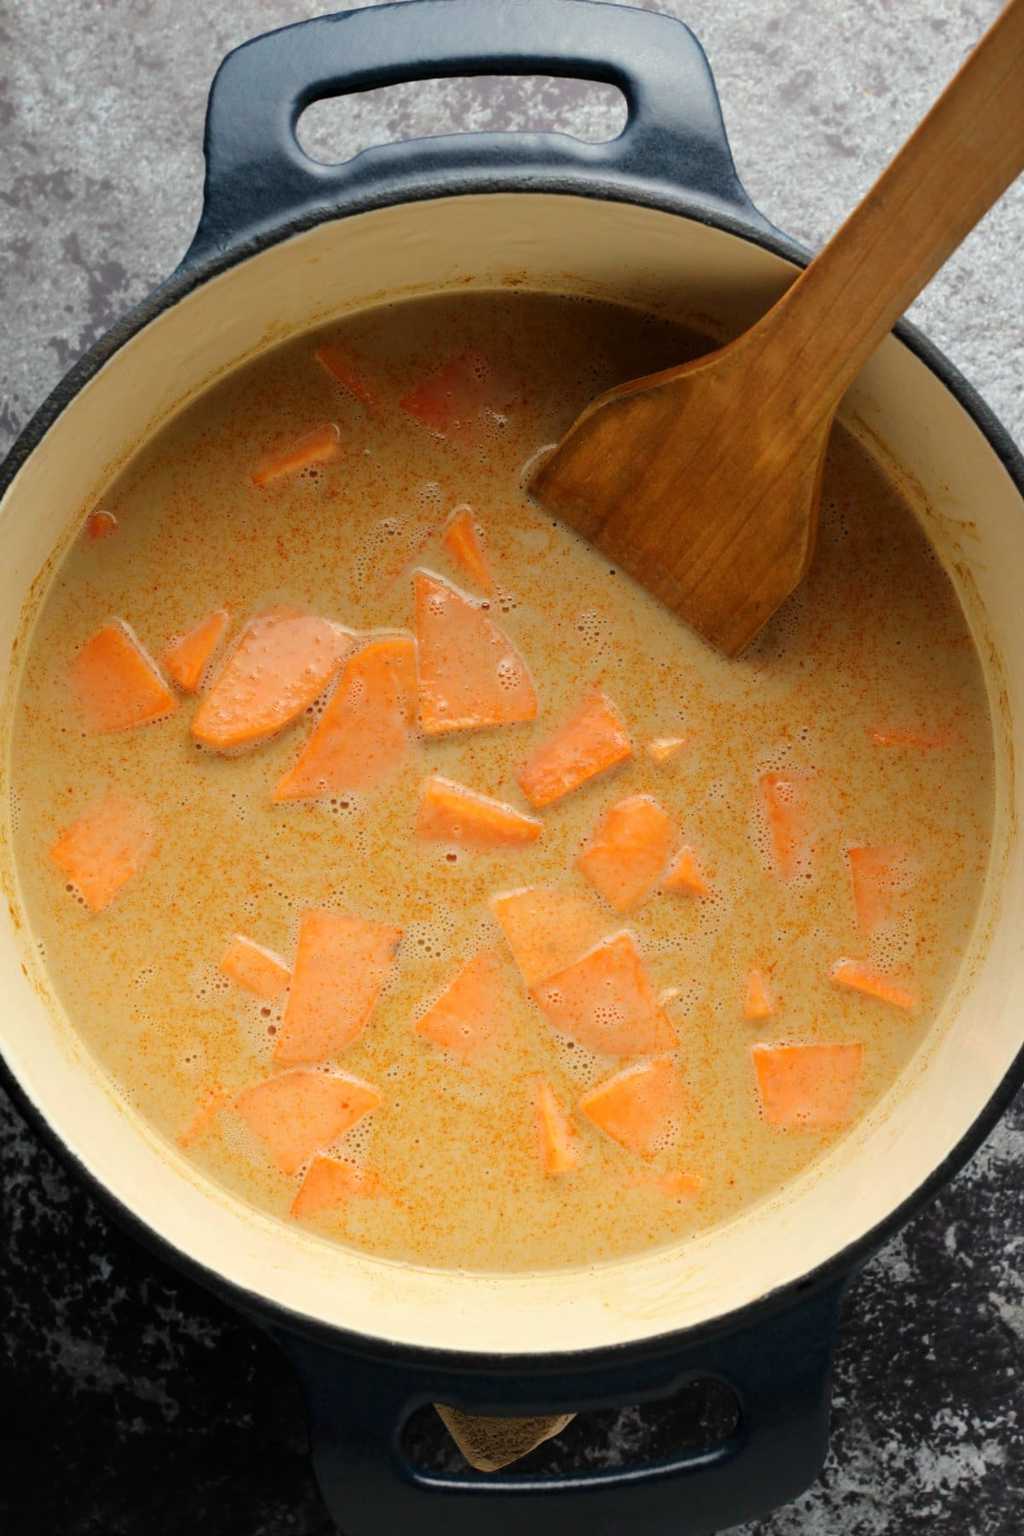 Sweet potato, coconut milk and spices in a cast iron pot with a wooden spoon.